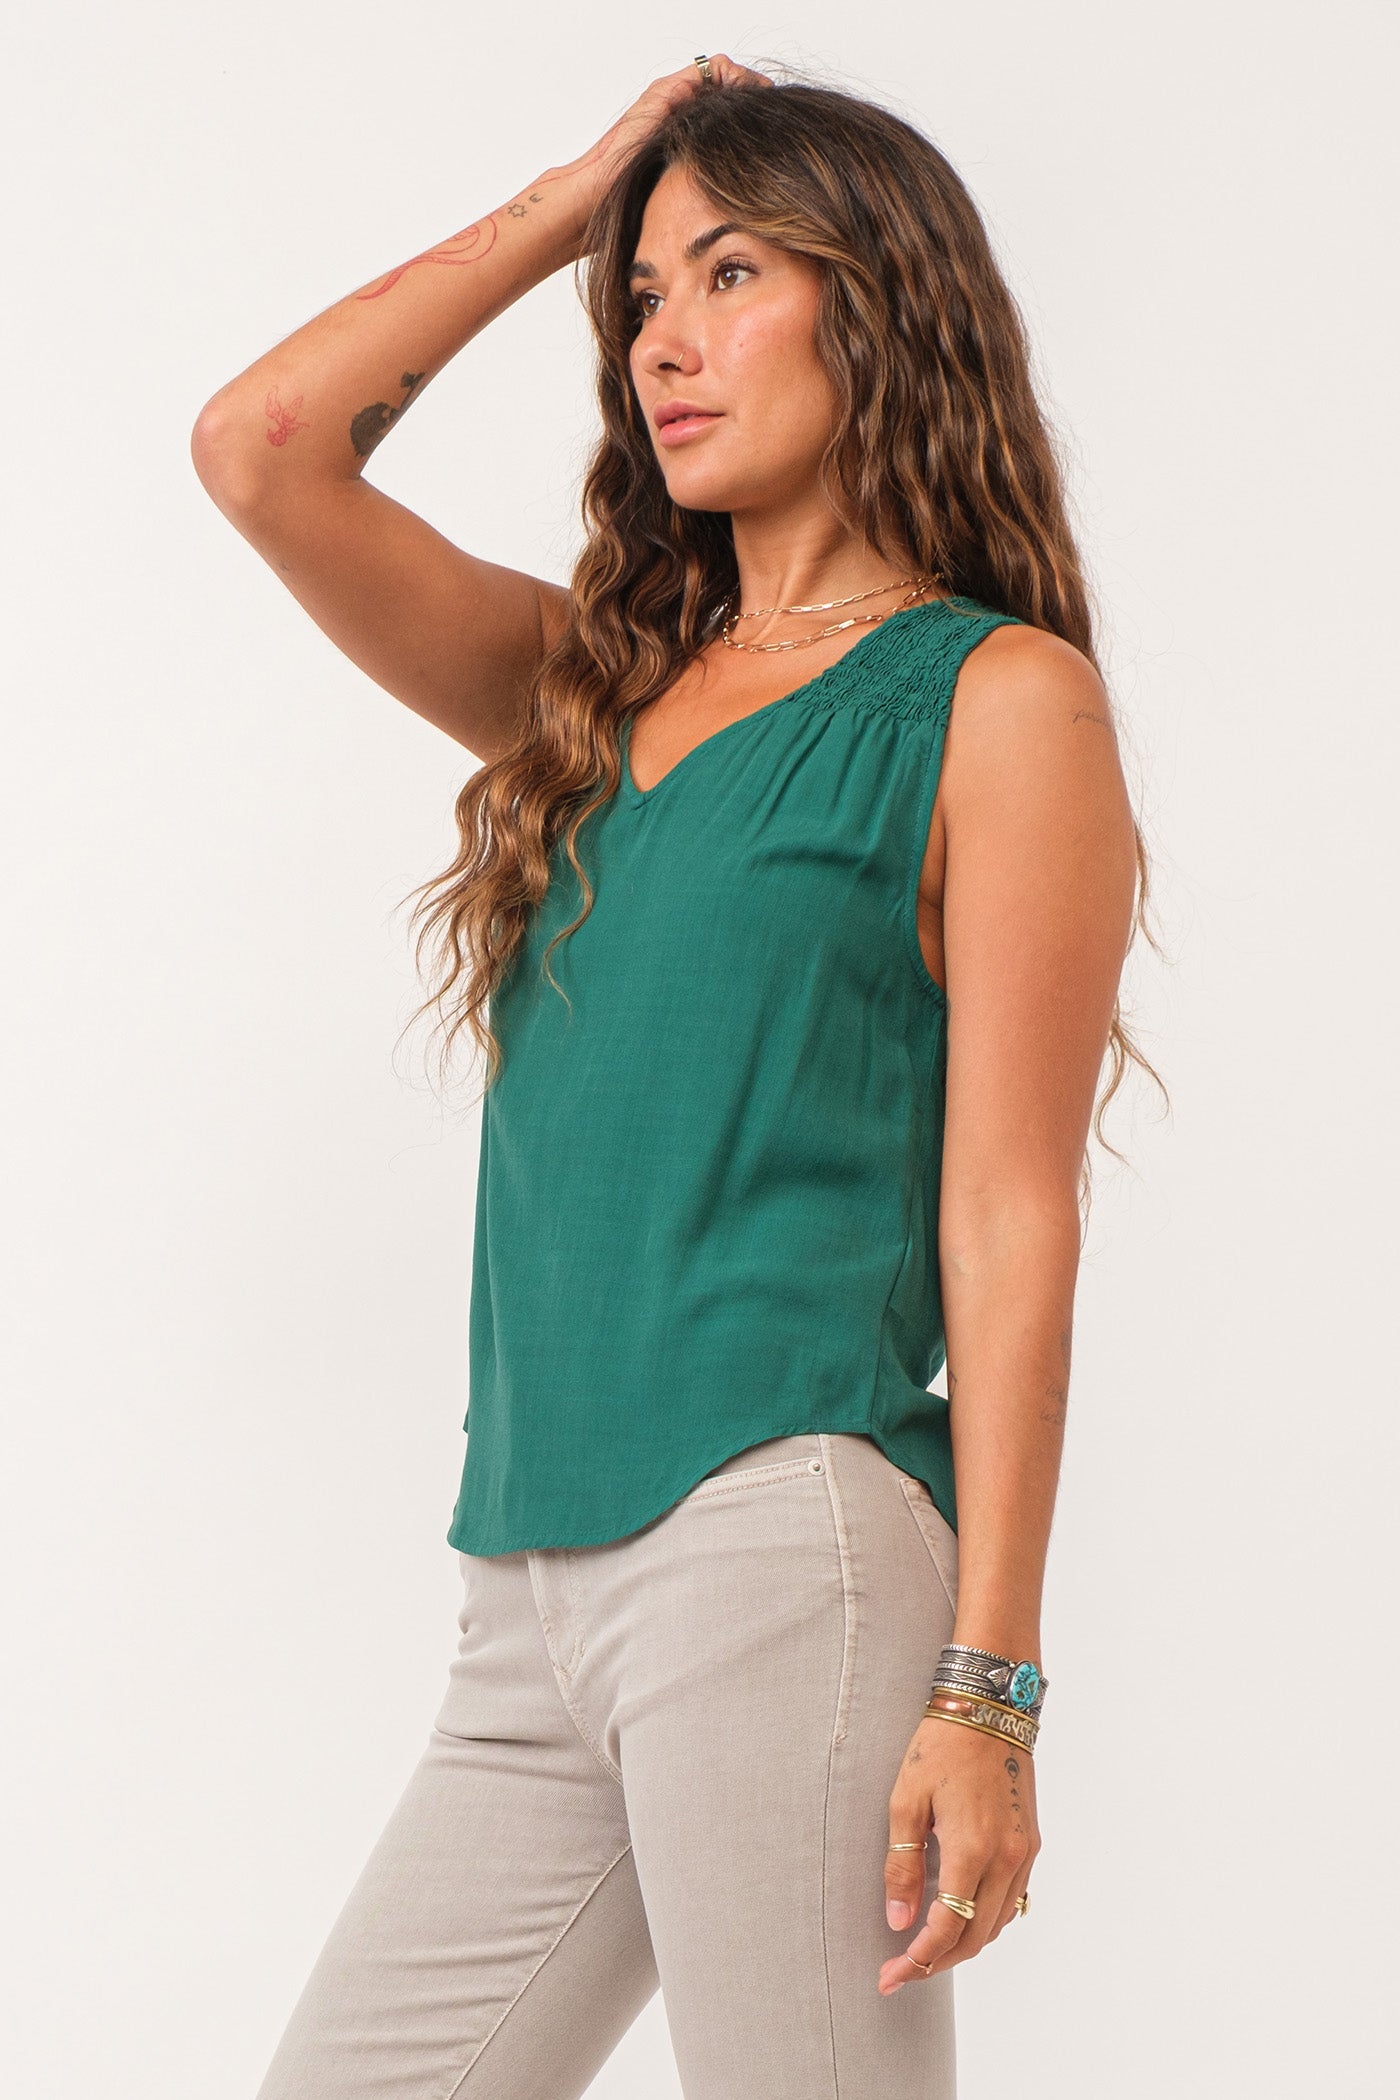 image of a female model wearing a PAIGE RUCHED DETAIL TANK GALAPAGOS GREEN DEAR JOHN DENIM 